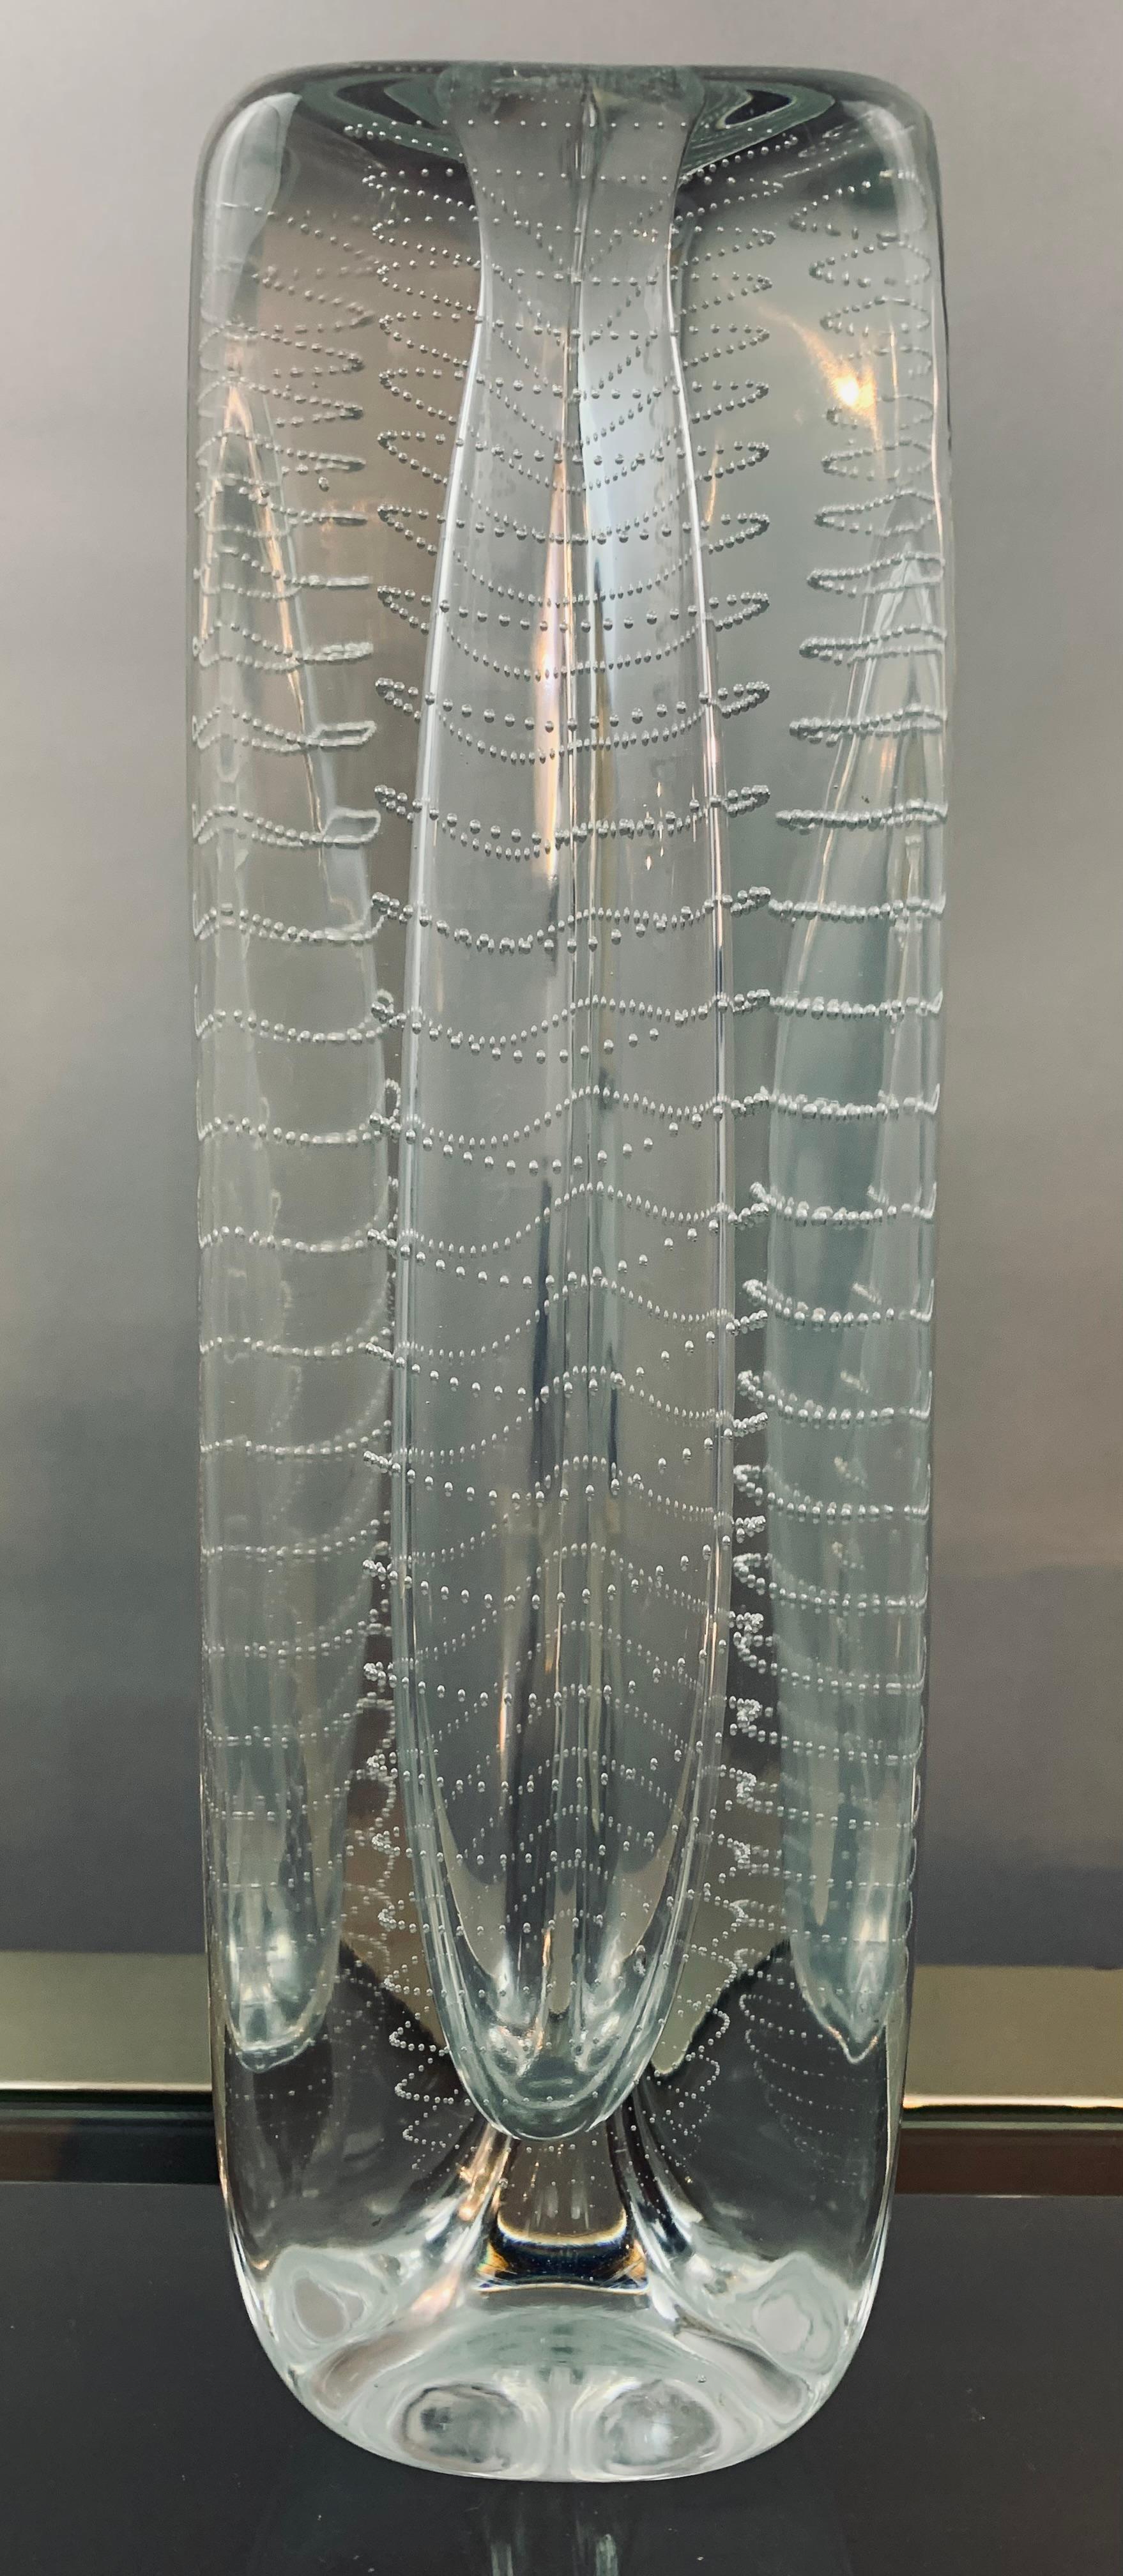 A stunning mid-century art glass triangular vase designed by Floris Meydam. Manufactured by the Royal Leerdam Glass Company in the Netherlands. Circa 1956. 

The vase which is designed for a single flower (solifleur) is hand blown with a spiral of